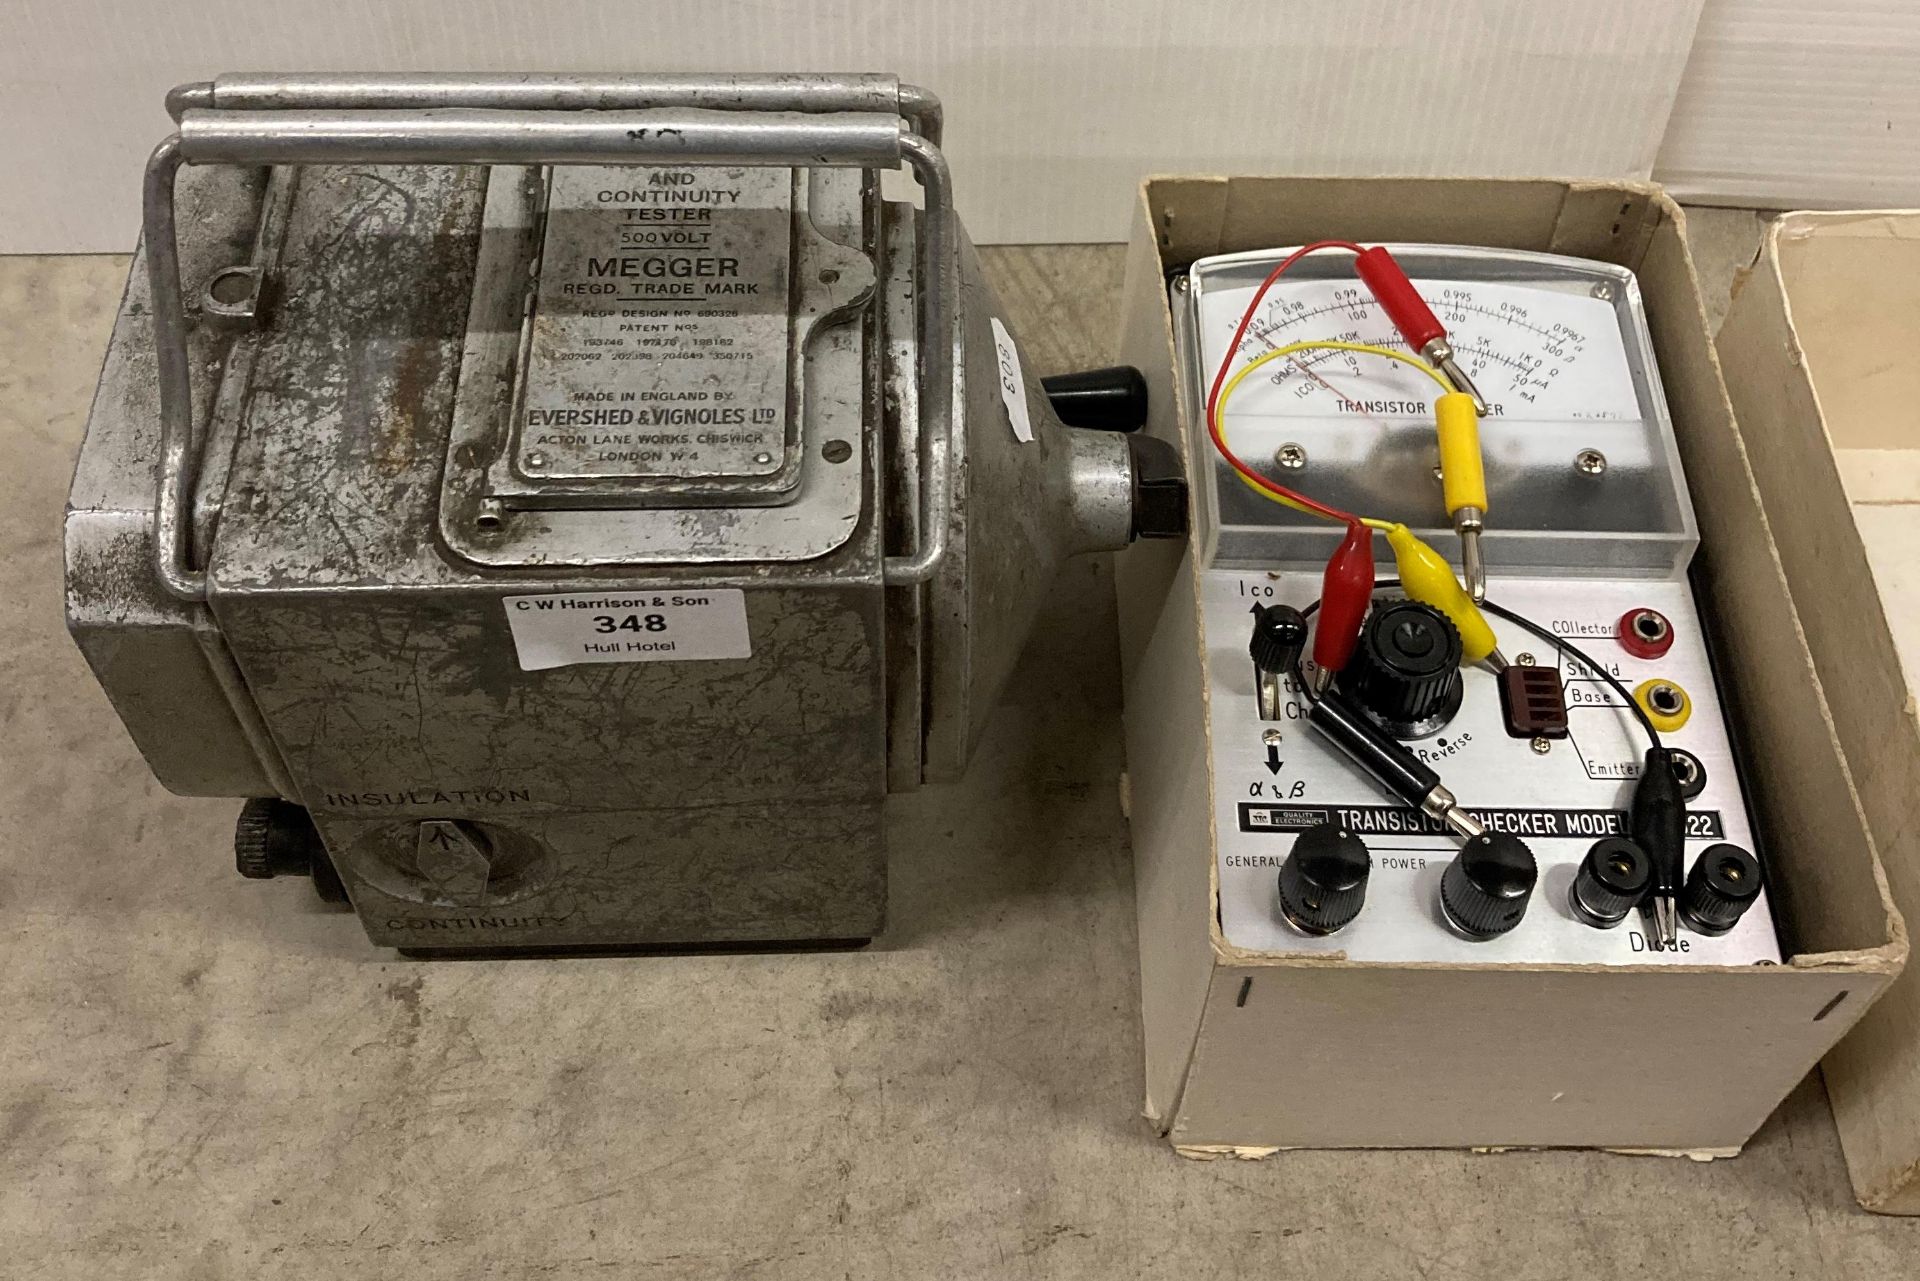 Two items - a Meg insulation and continuity tester (500v) mega and a TTC transistor checker model: